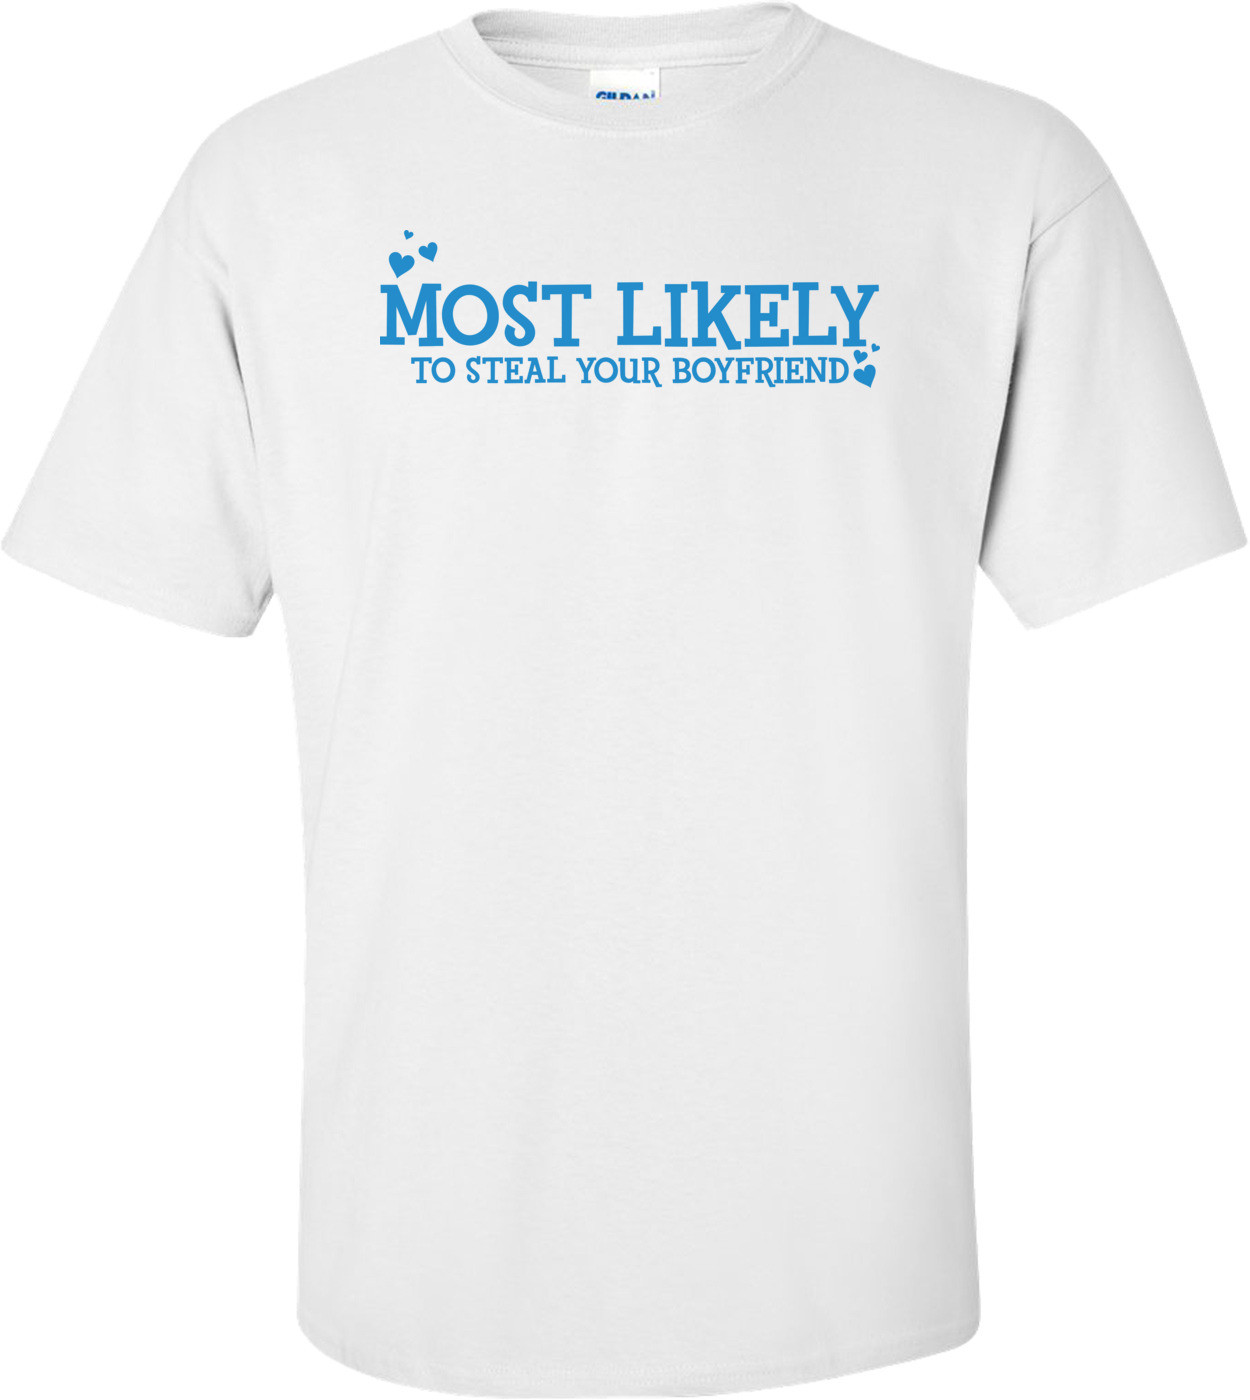 Most Likely To Steal Your Boyfriend T-shirt 